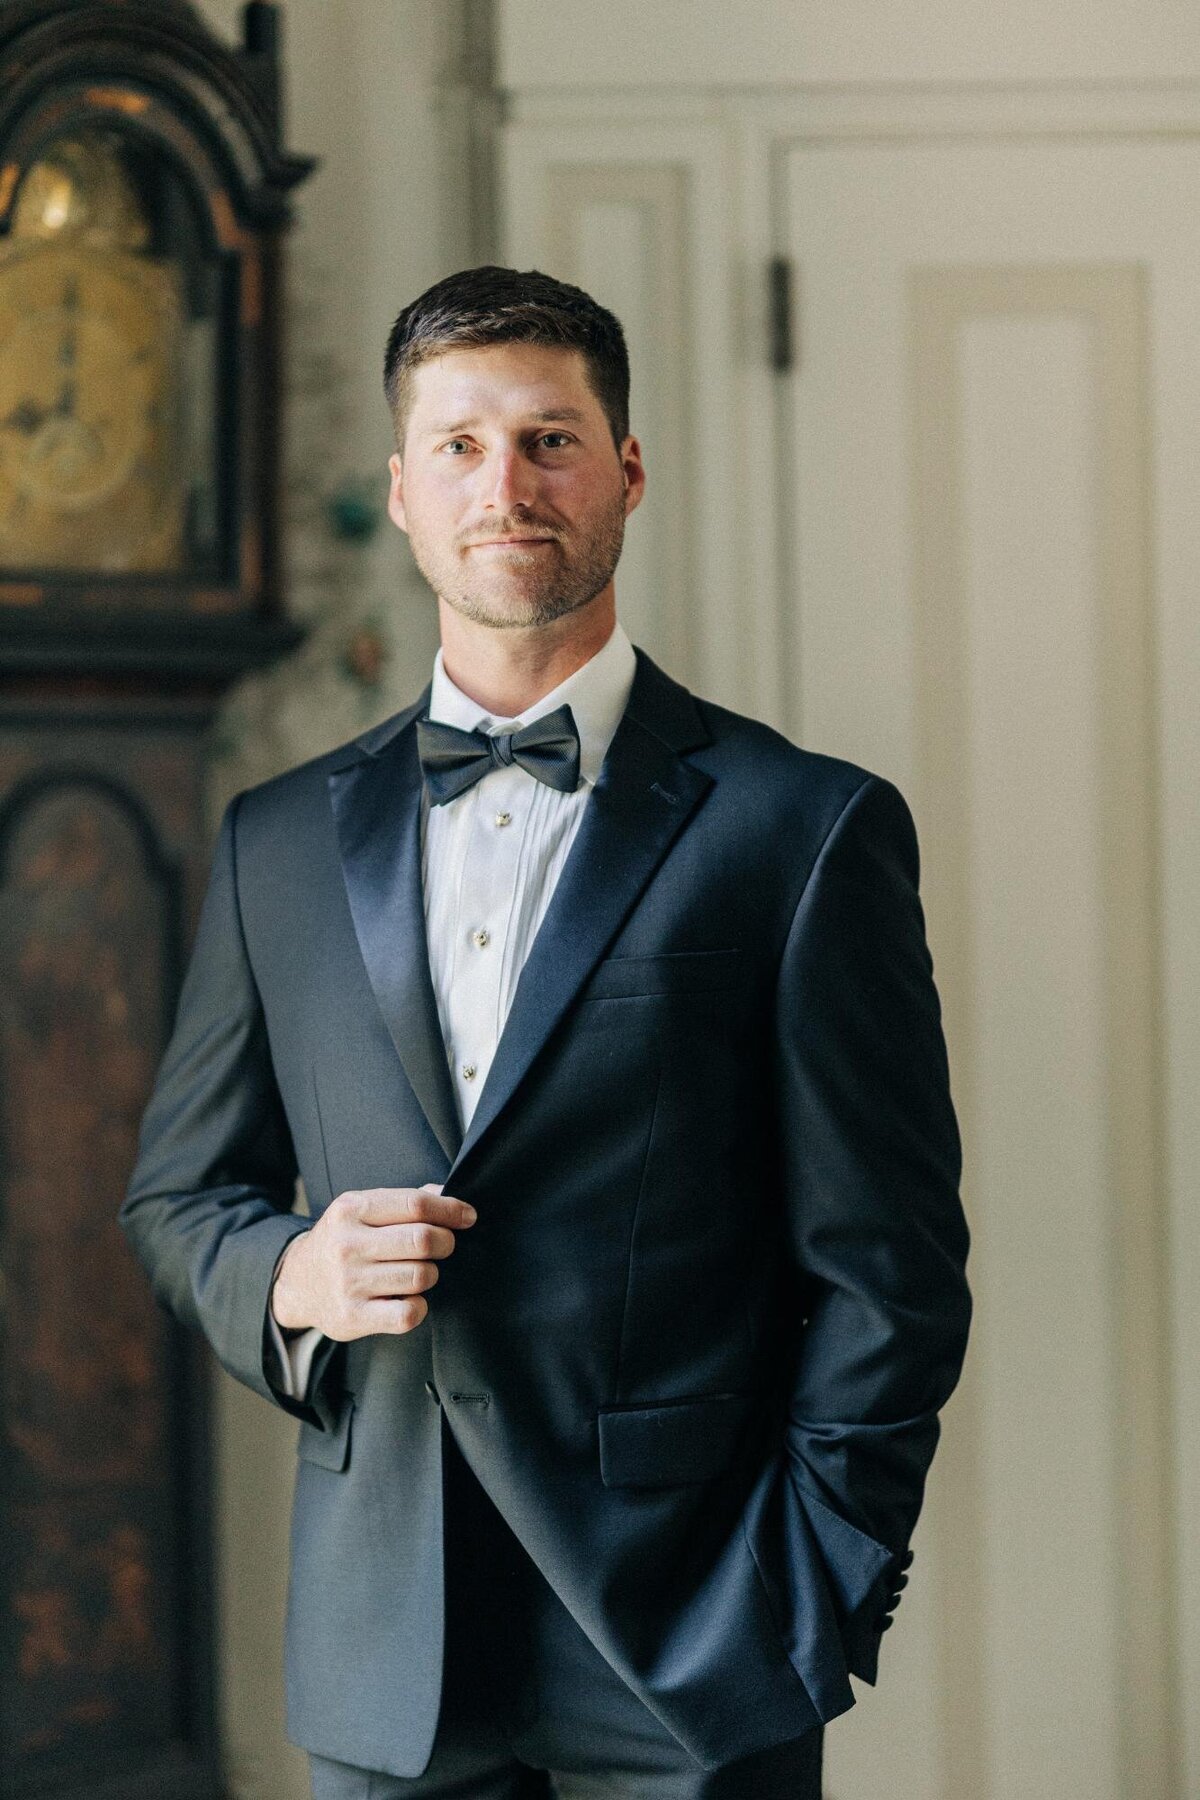 A man in a formal black tuxedo and bow tie posing with his hands in his pockets.